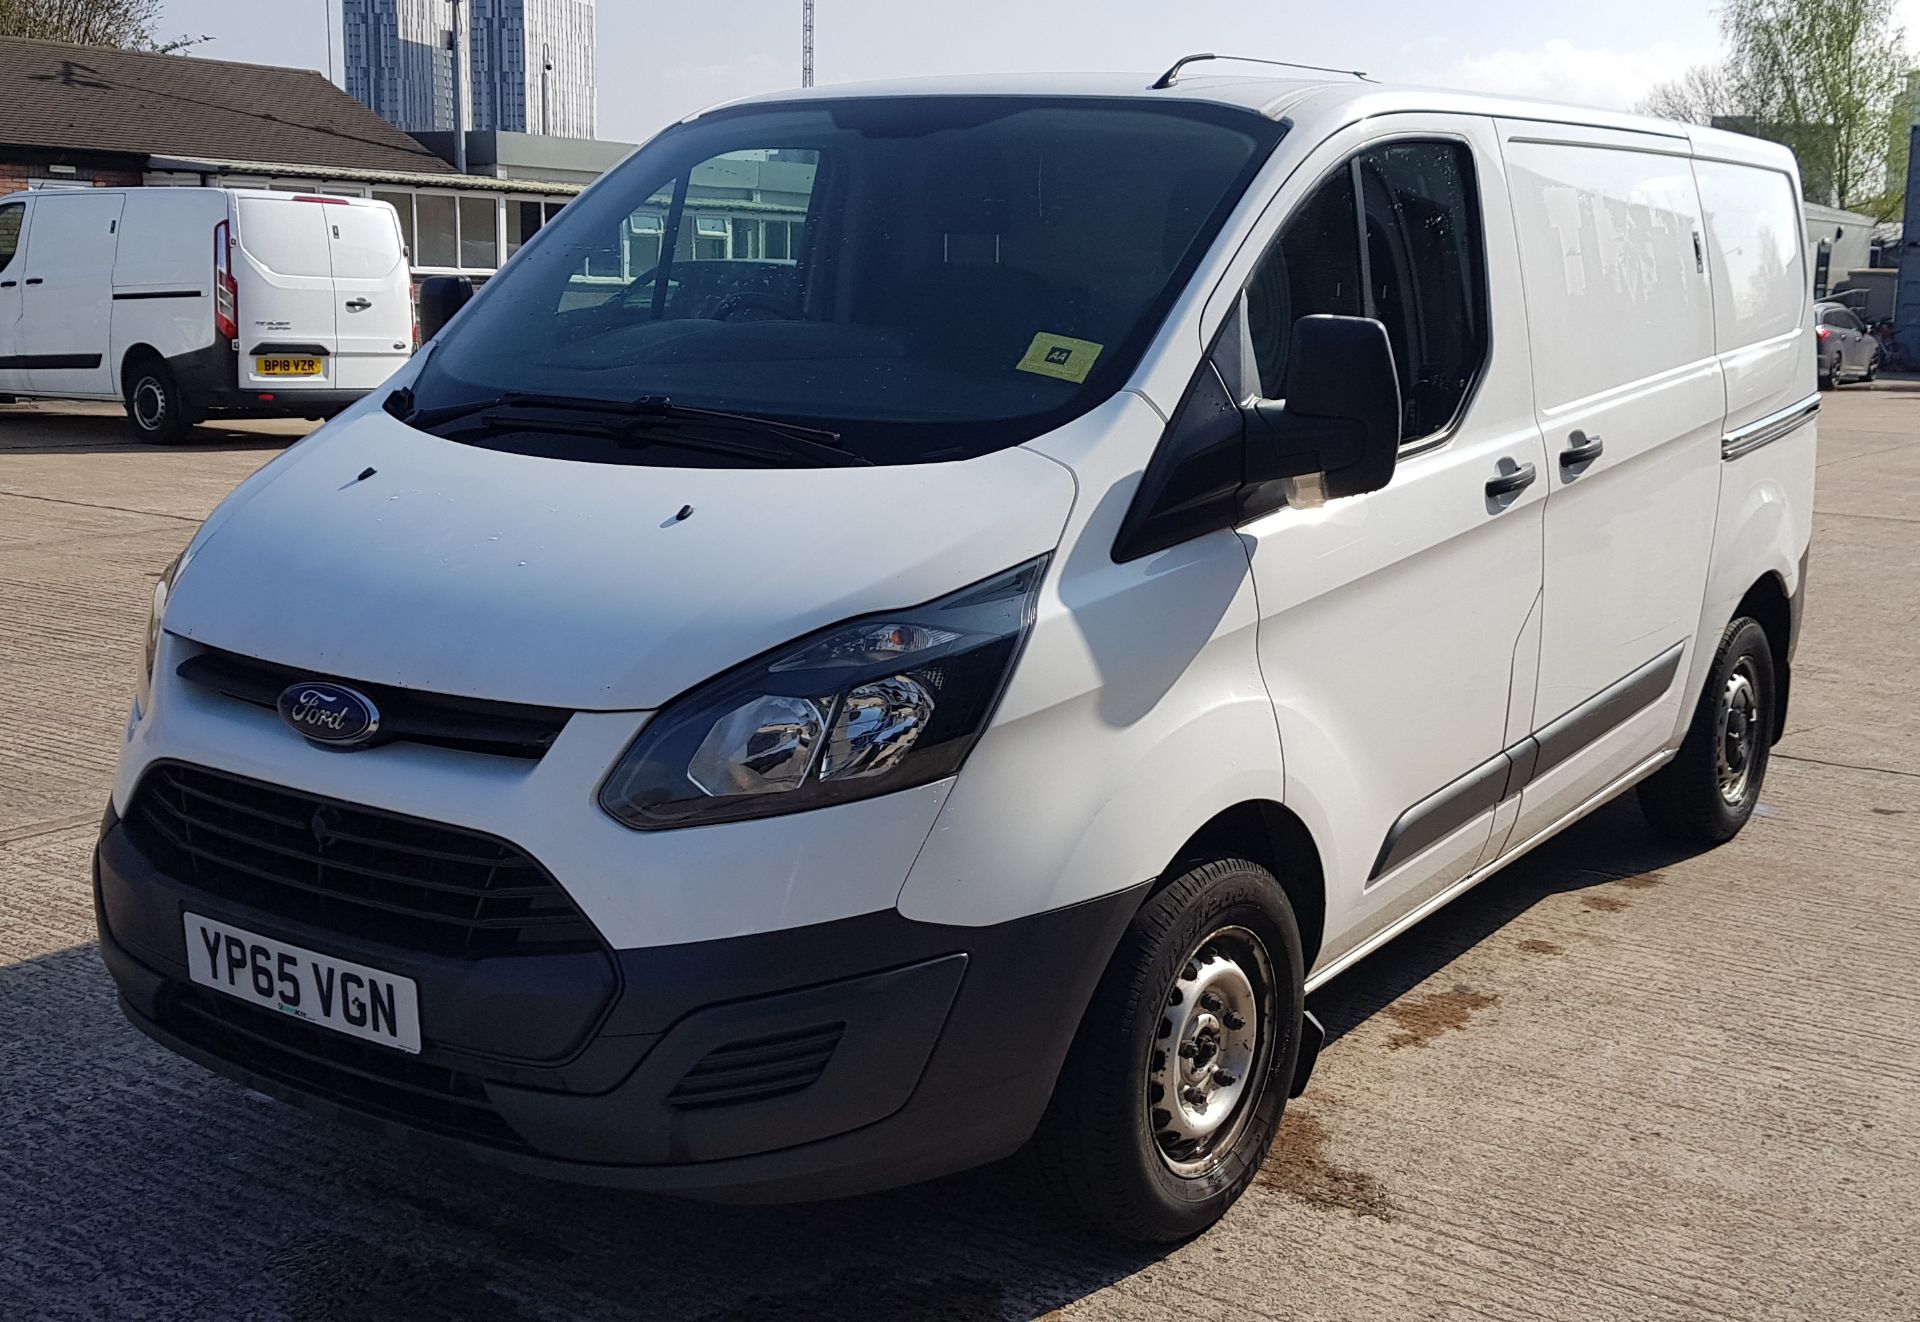 WHITE FORD TRANSIT CUSTOM 270 ECO TECH. ( DIESEL ) Reg : YP65 VGN, Mileage : 93,455 Details: FIRST - Image 2 of 13